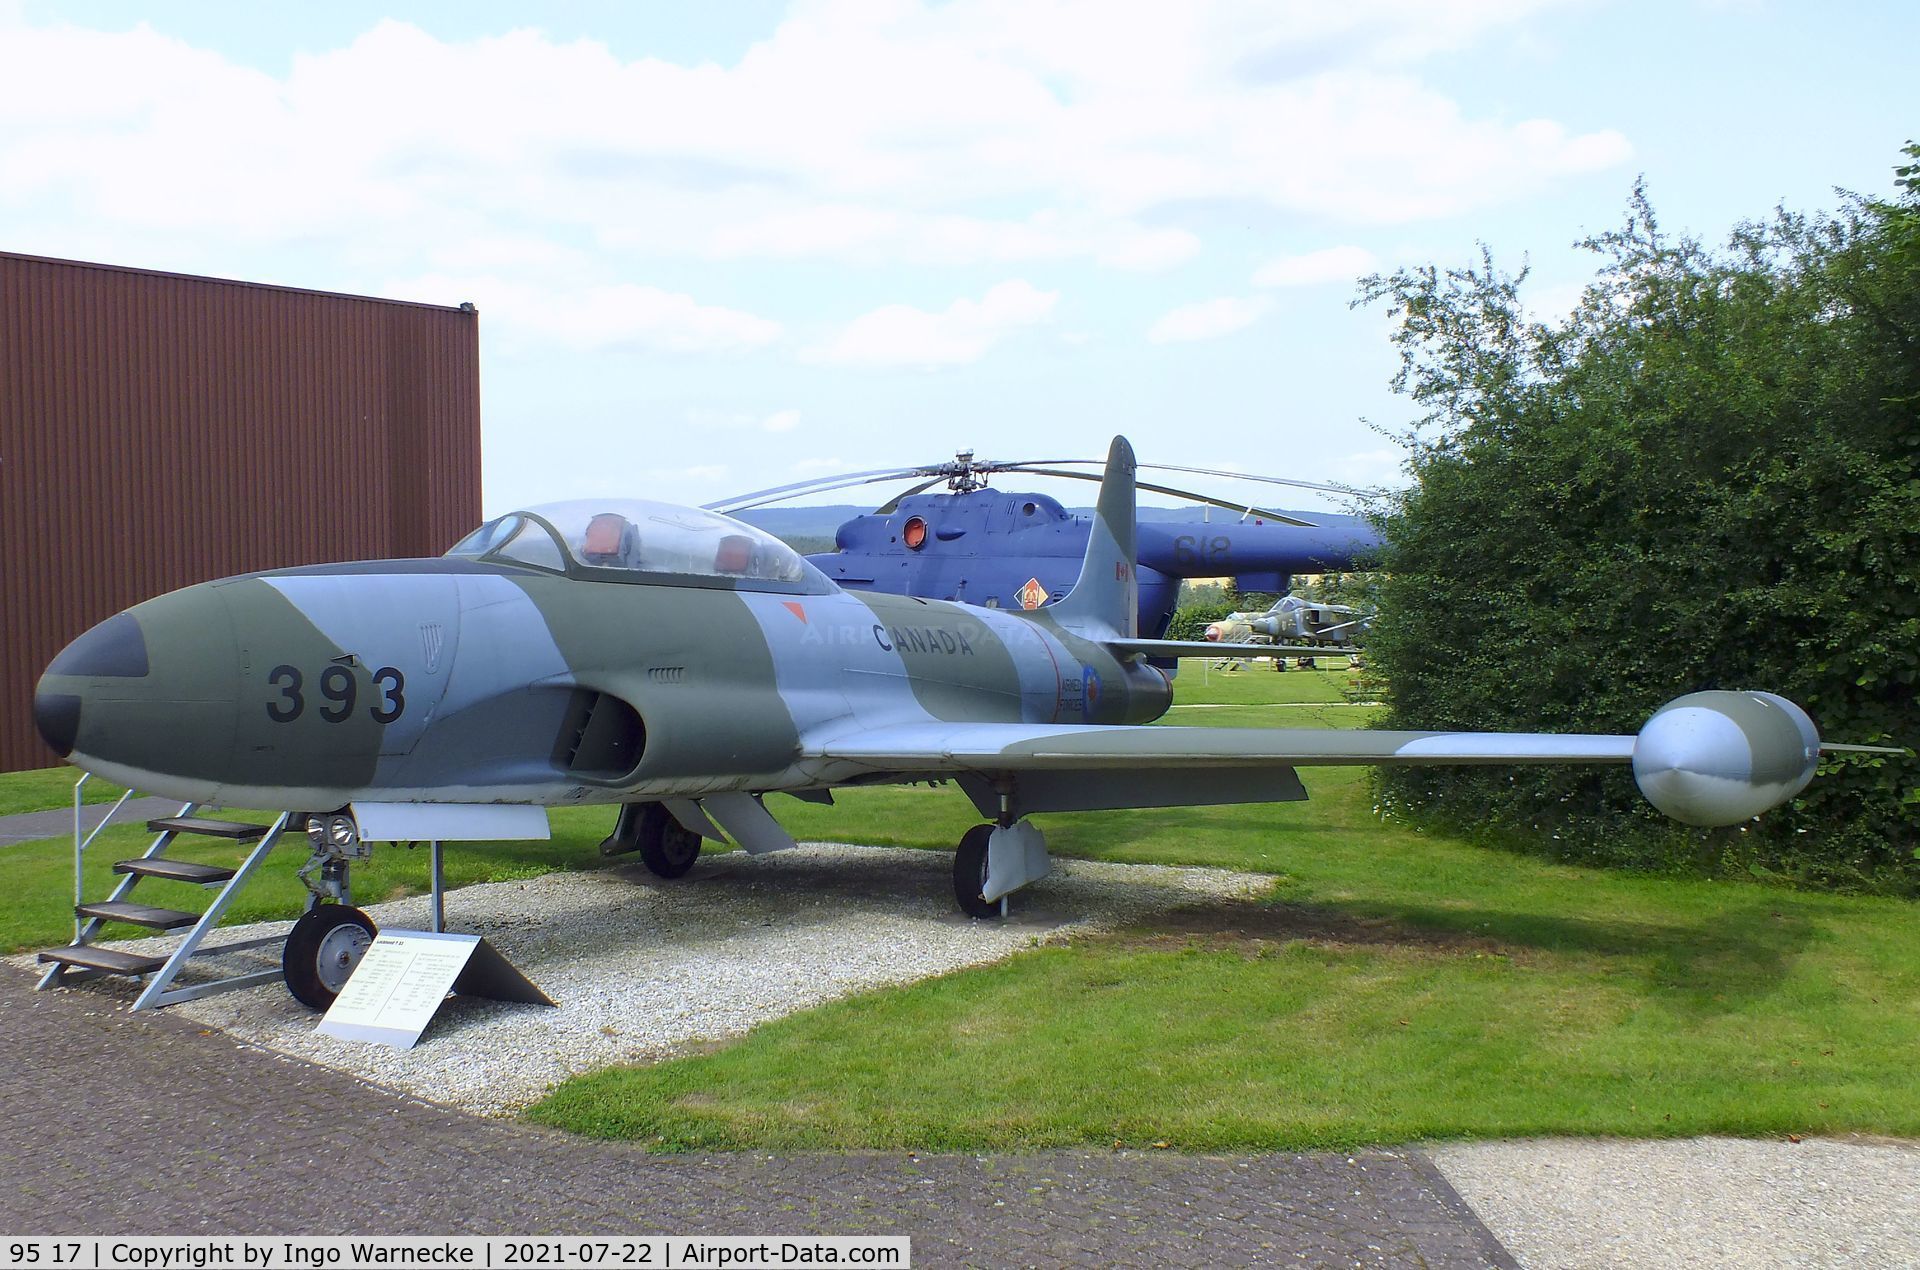 95 17, 1958 Lockheed T-33A Shooting Star C/N 580-1650, Lockheed T-33A, displayed in Canadian Forces markings at the Flugausstellung P. Junior, Hermeskeil